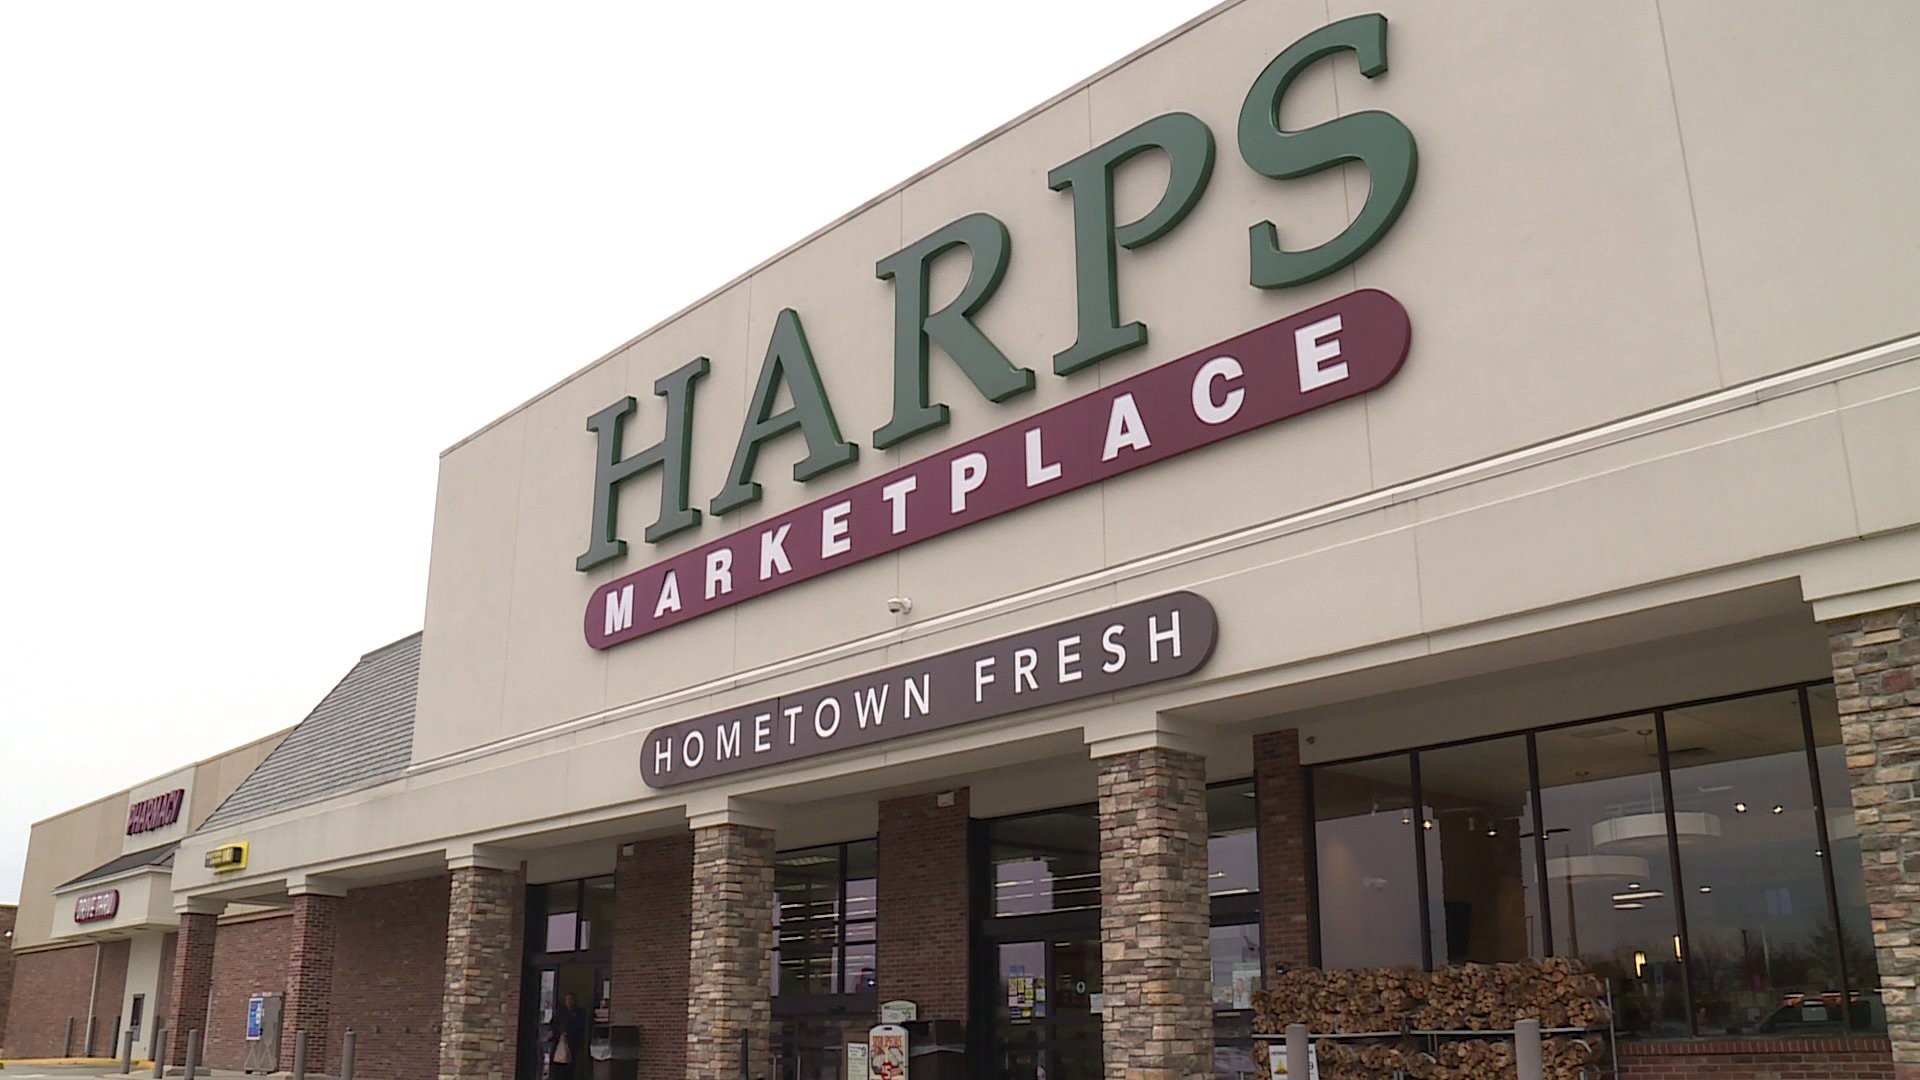 Harps Food Stores Inc. of Springdale will enter Louisiana and Mississippi with the purchase of The Markets, a 53-year-old family owned grocer based in Mississippi.